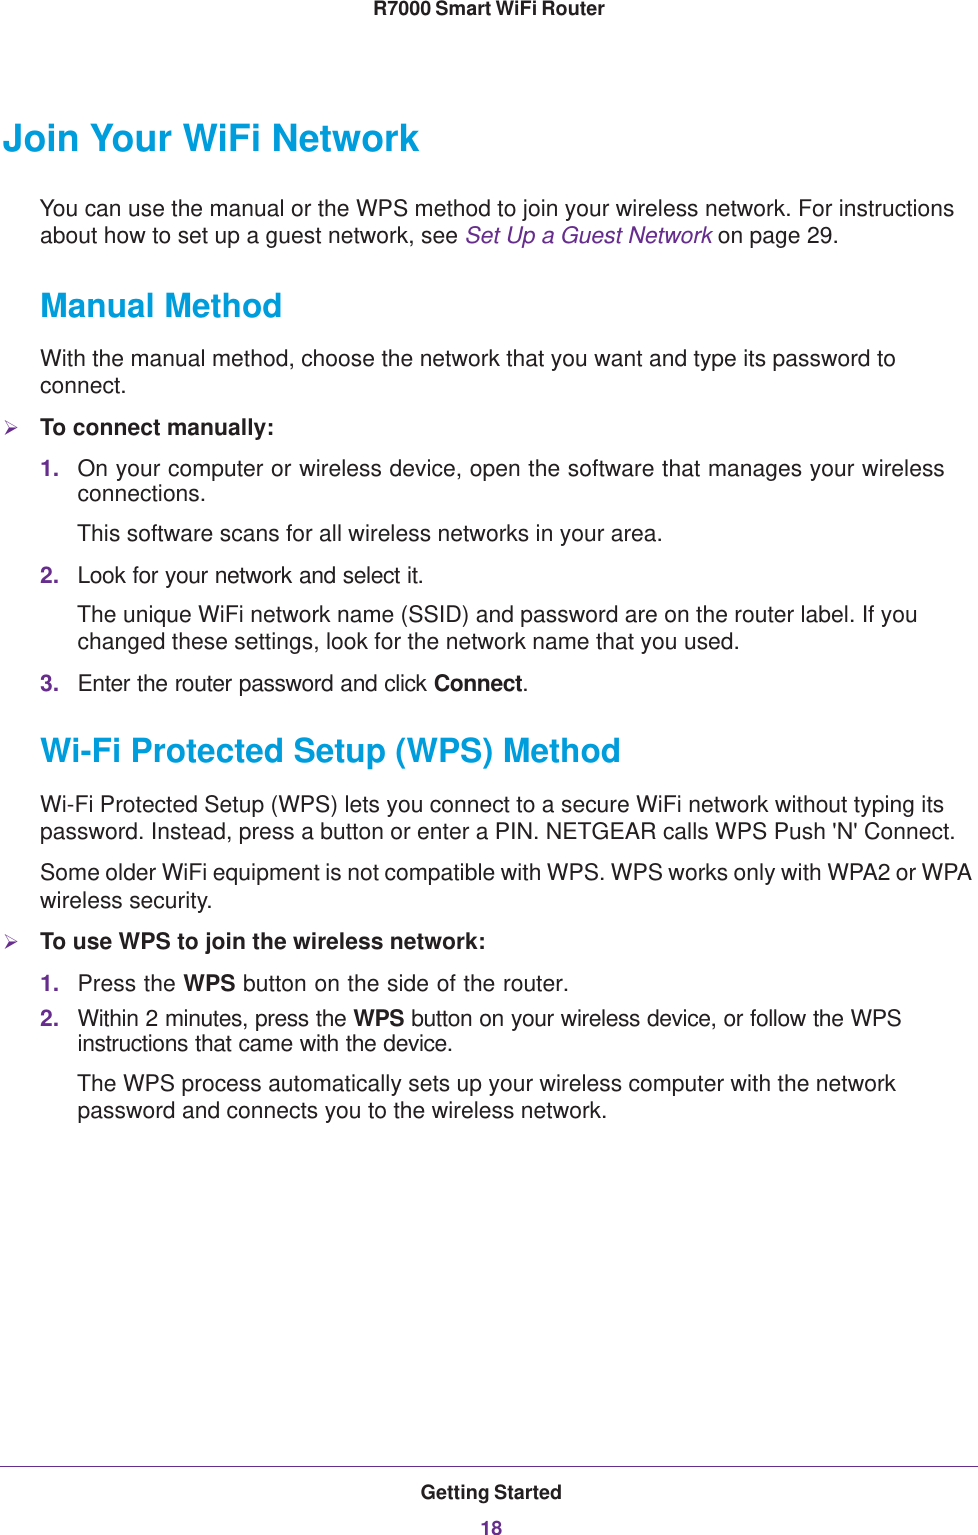 Getting Started18R7000 Smart WiFi Router Join Your WiFi NetworkYou can use the manual or the WPS method to join your wireless network. For instructions about how to set up a guest network, see Set Up a Guest Network on page  29.Manual MethodWith the manual method, choose the network that you want and type its password to connect.To connect manually:1. On your computer or wireless device, open the software that manages your wireless connections. This software scans for all wireless networks in your area.2. Look for your network and select it. The unique WiFi network name (SSID) and password are on the router label. If you changed these settings, look for the network name that you used.3. Enter the router password and click Connect.Wi-Fi Protected Setup (WPS) MethodWi-Fi Protected Setup (WPS) lets you connect to a secure WiFi network without typing its password. Instead, press a button or enter a PIN. NETGEAR calls WPS Push &apos;N&apos; Connect.Some older WiFi equipment is not compatible with WPS. WPS works only with WPA2 or WPA wireless security.To use WPS to join the wireless network:1. Press the WPS button on the side of the router.2. Within 2 minutes, press the WPS button on your wireless device, or follow the WPS instructions that came with the device. The WPS process automatically sets up your wireless computer with the network password and connects you to the wireless network.